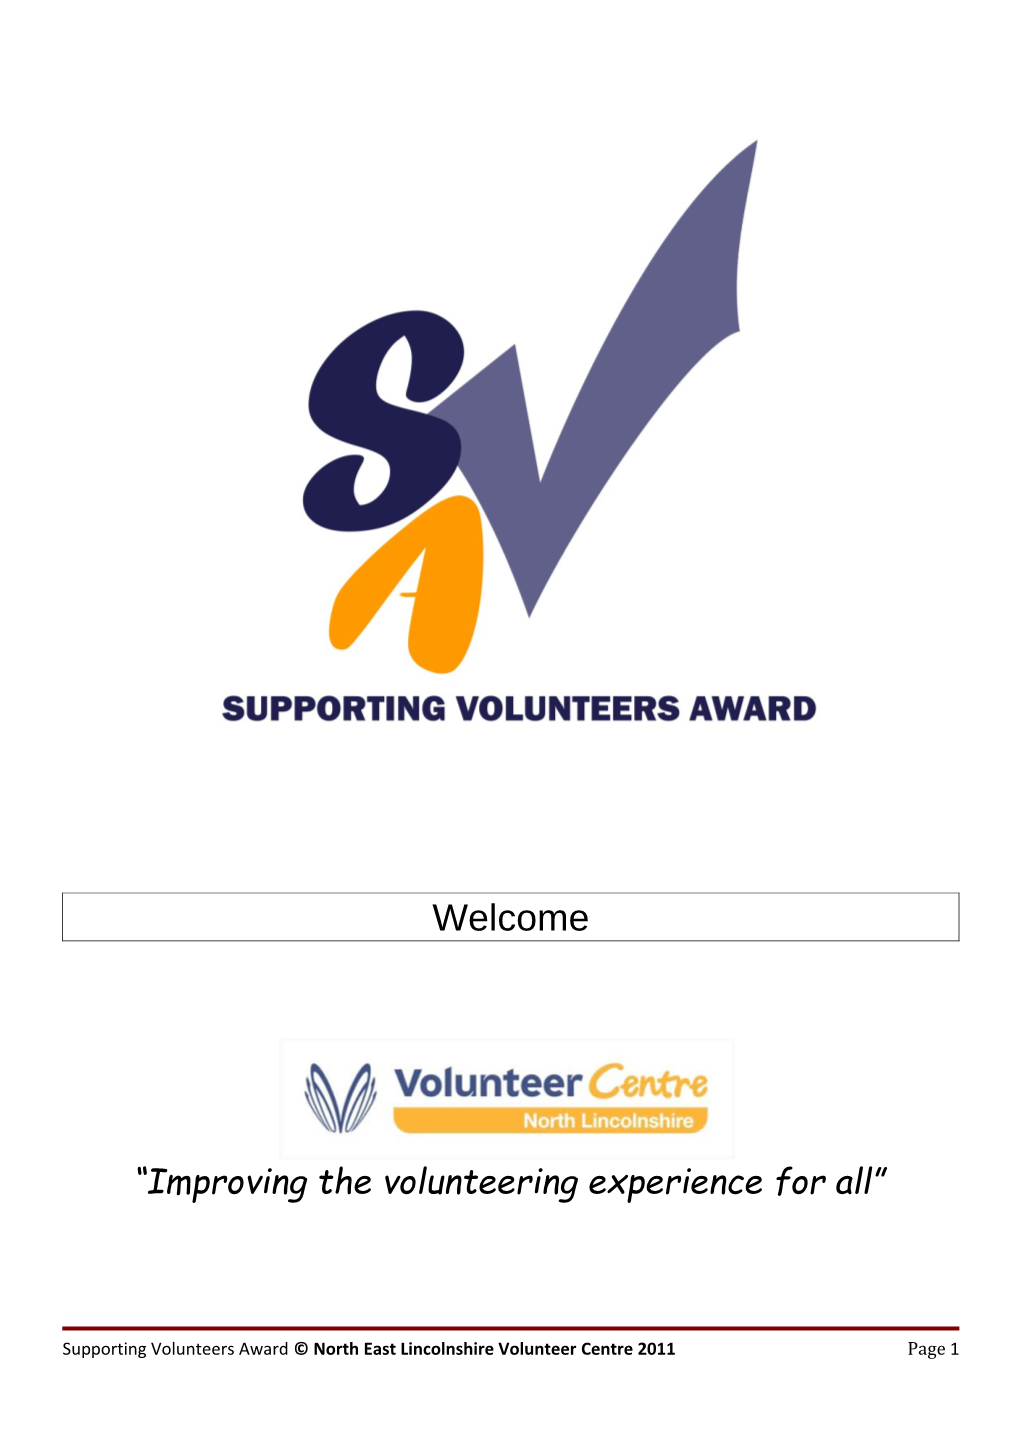 What Is the Supporting Volunteers Award?